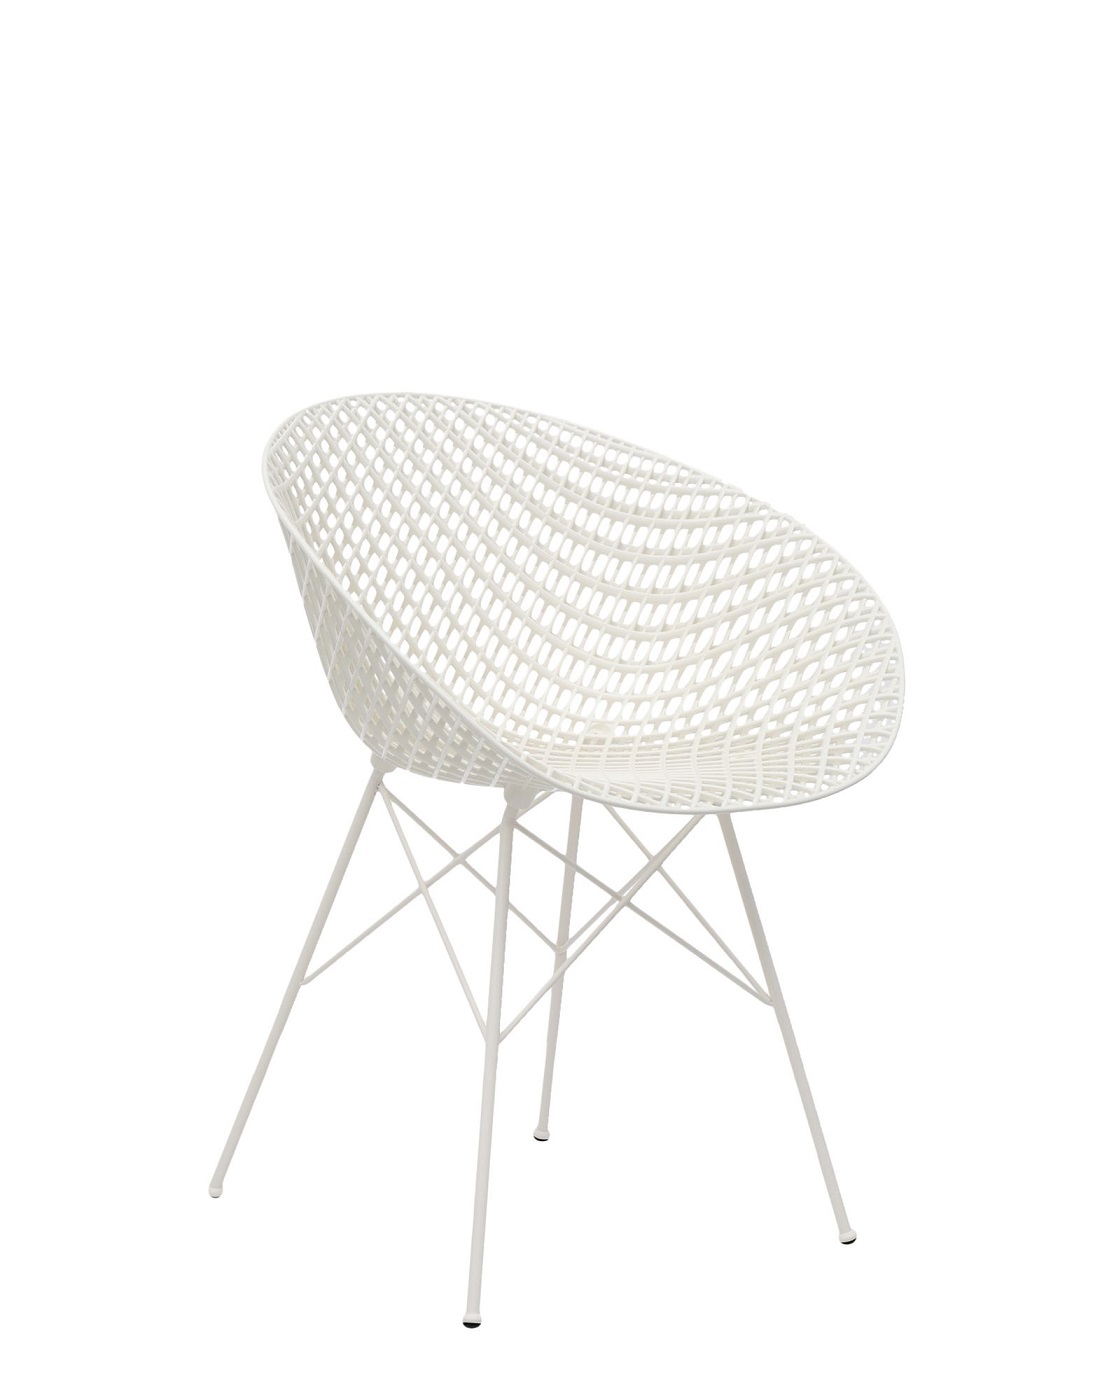 chairs-matrix-outdoor-philippe-starck-white-side